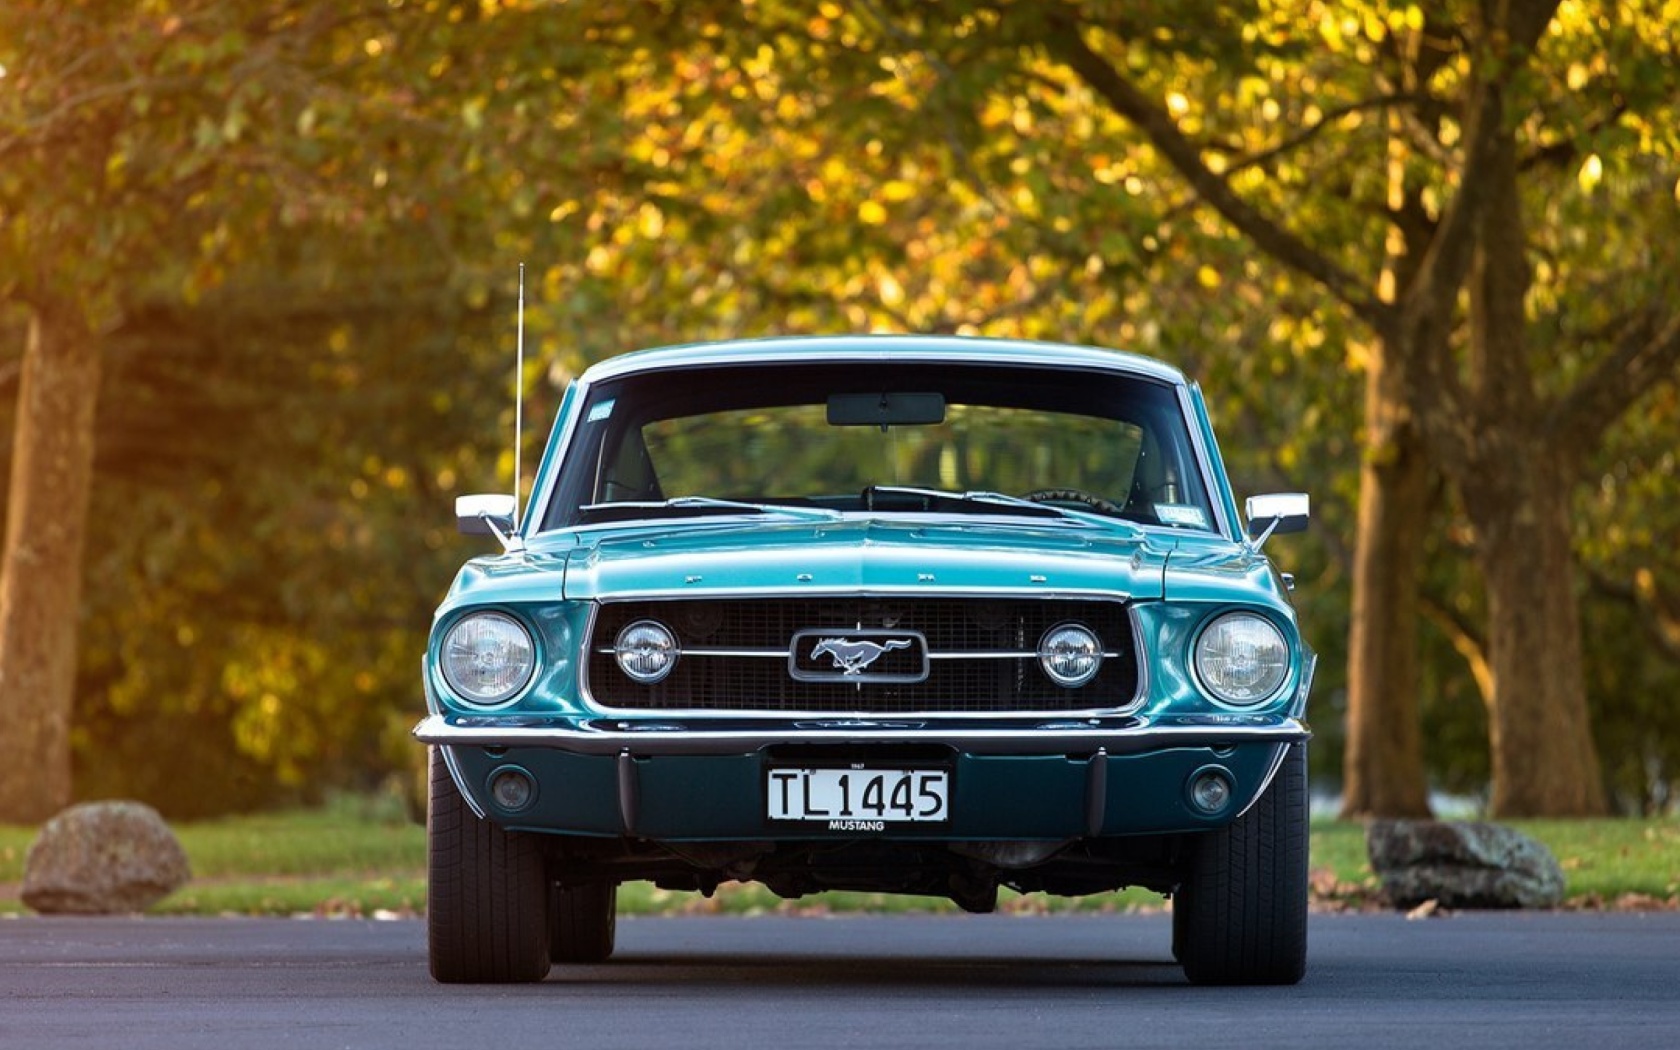 Ford Mustang First Generation wallpaper 1680x1050